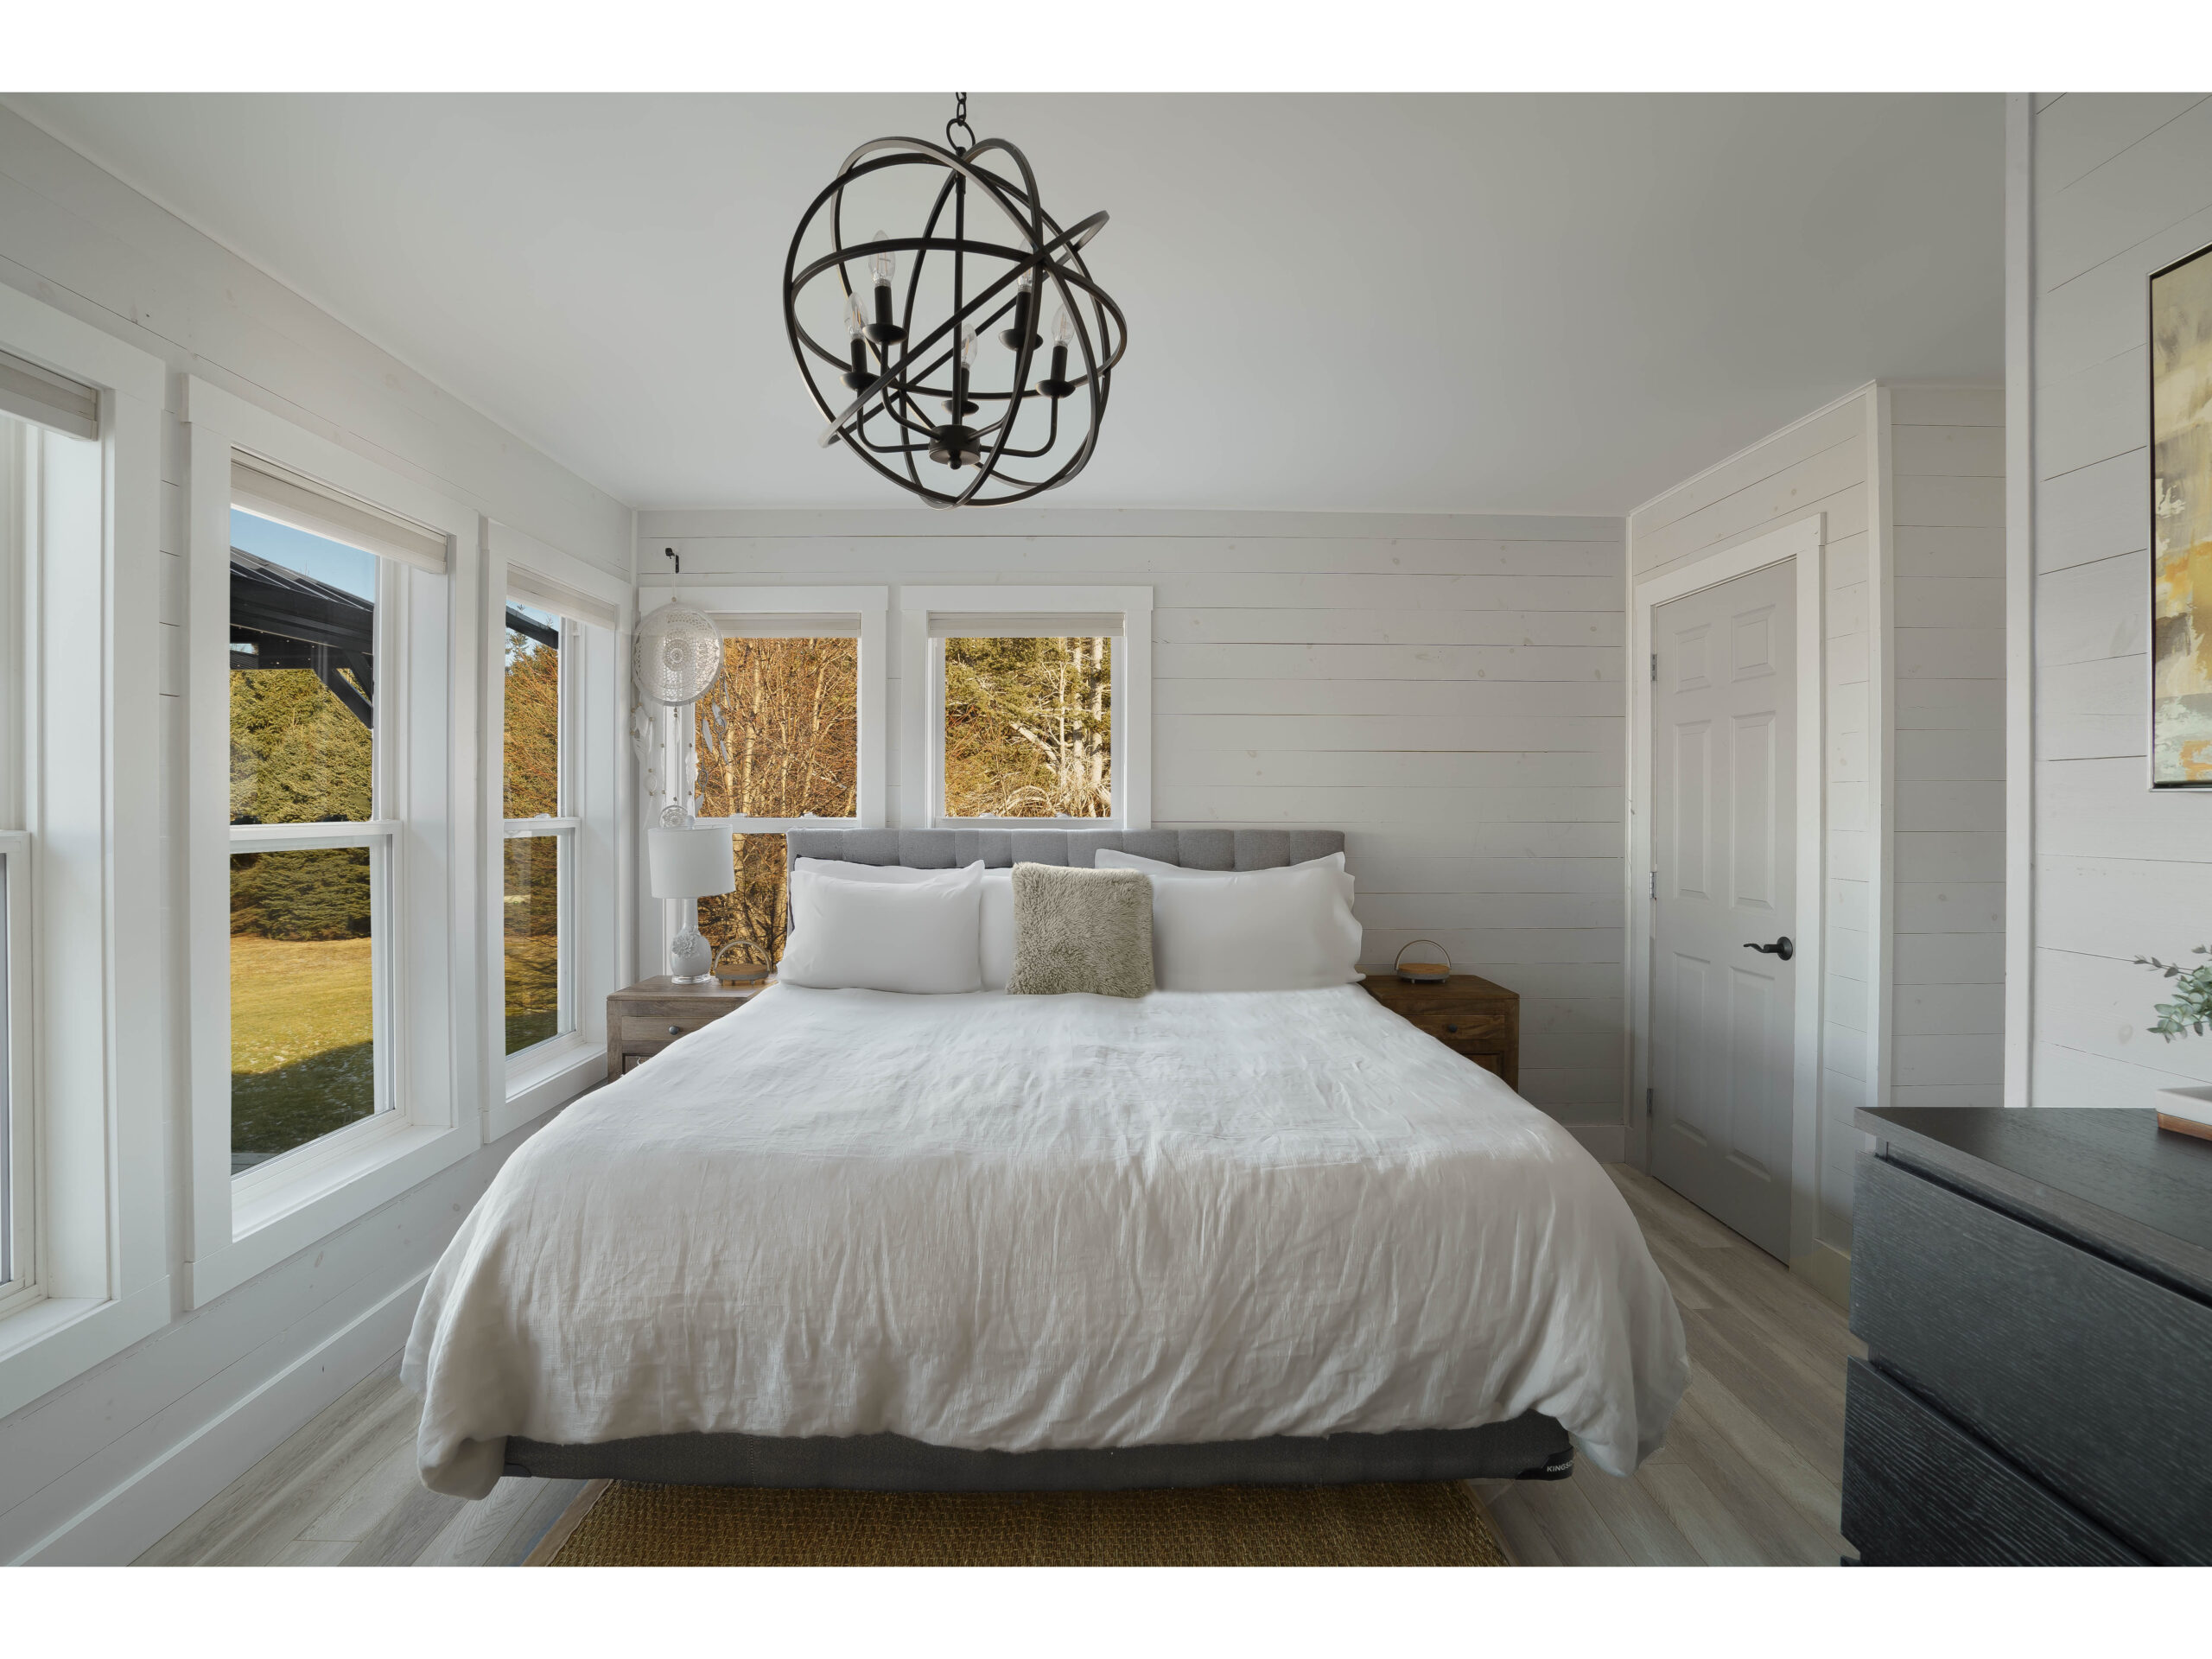 A large primary bedroom with a big bed, a modern light fixture, a dresser, and lots of windows.